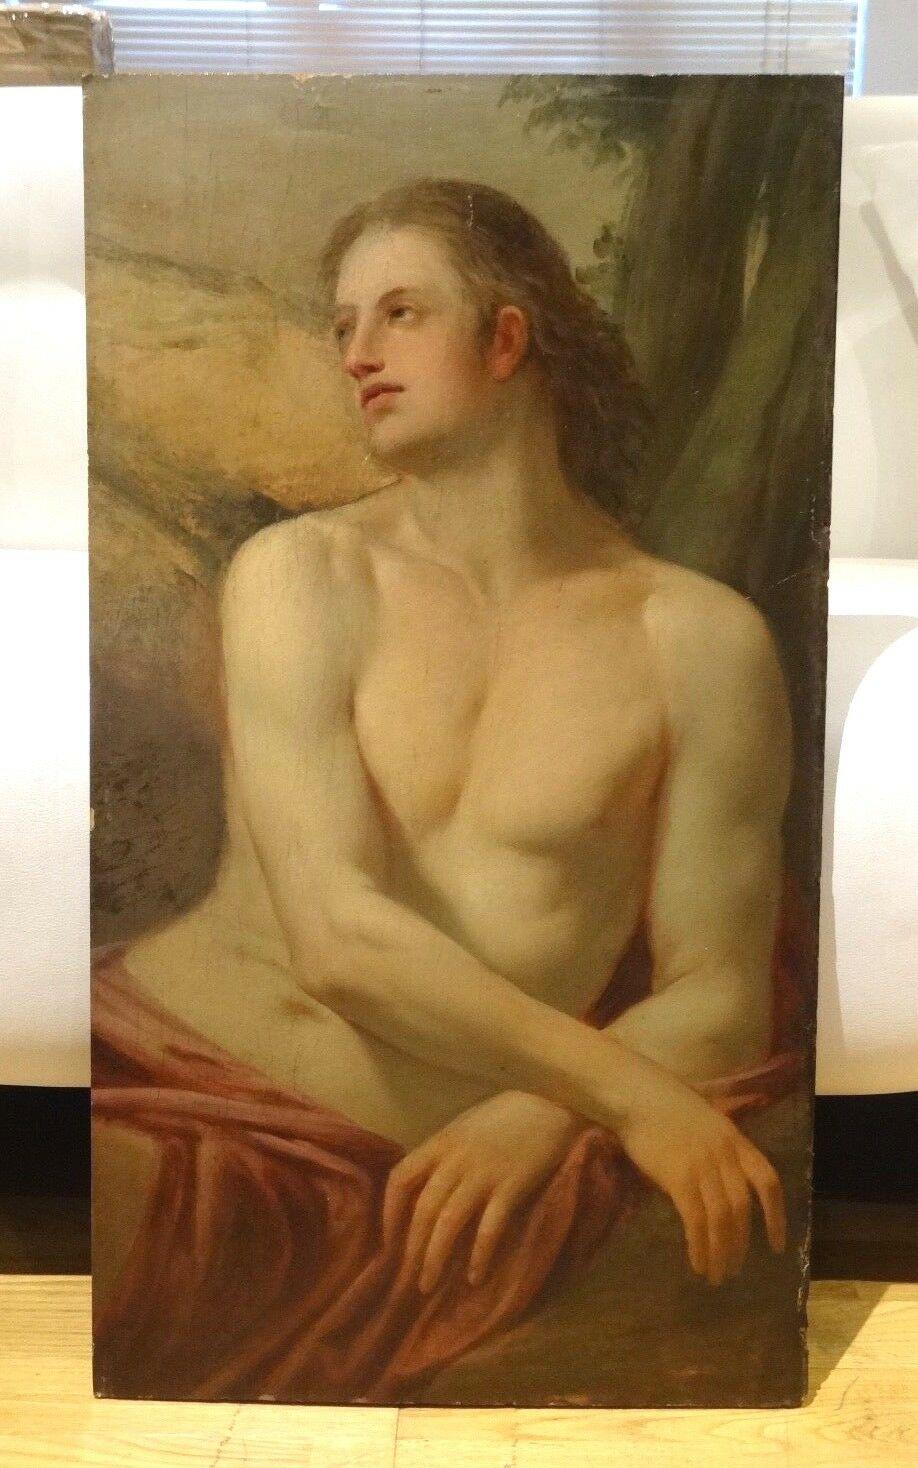 Study Of A Male, Possibly as St Sebastian, 16th Century

Early Italian School Oil On Panel

Fine 16th Century Italian School Old Master portrait of a male by a tree, possibly as St Sebastian, oil on panel. Stunning early study of a partially clothed